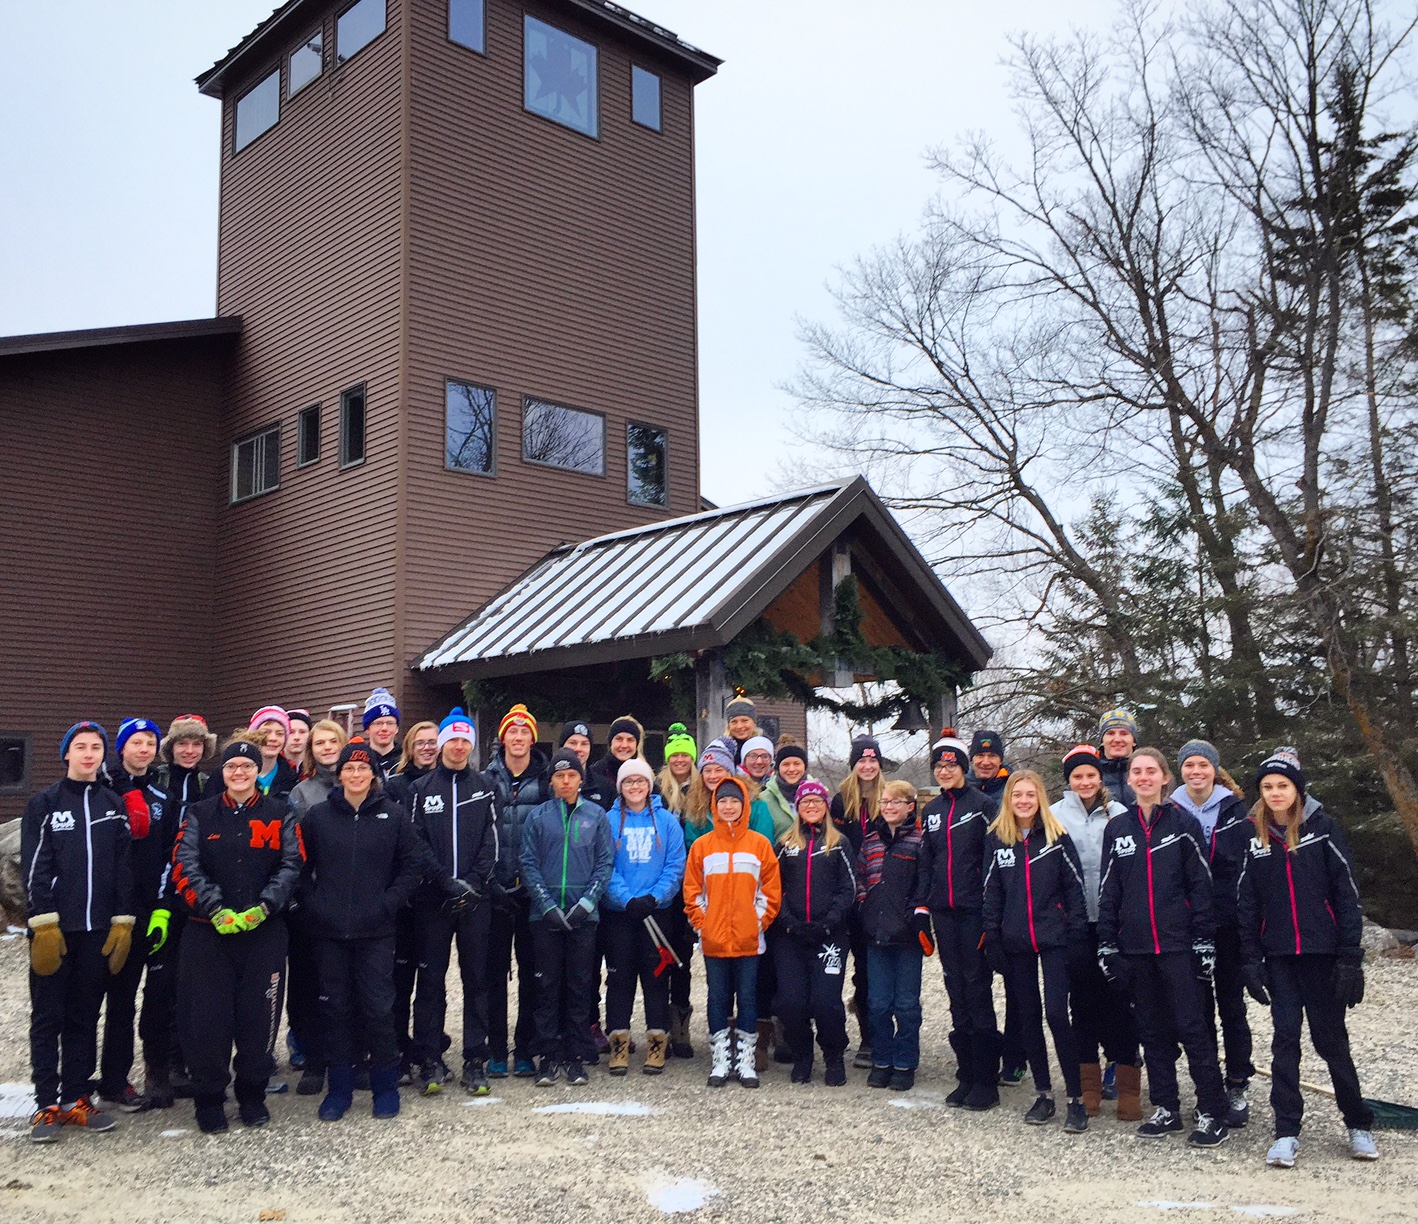 Moorhead Nordic ski team after a morning of clearing on the trails. December 3rd, 2016.